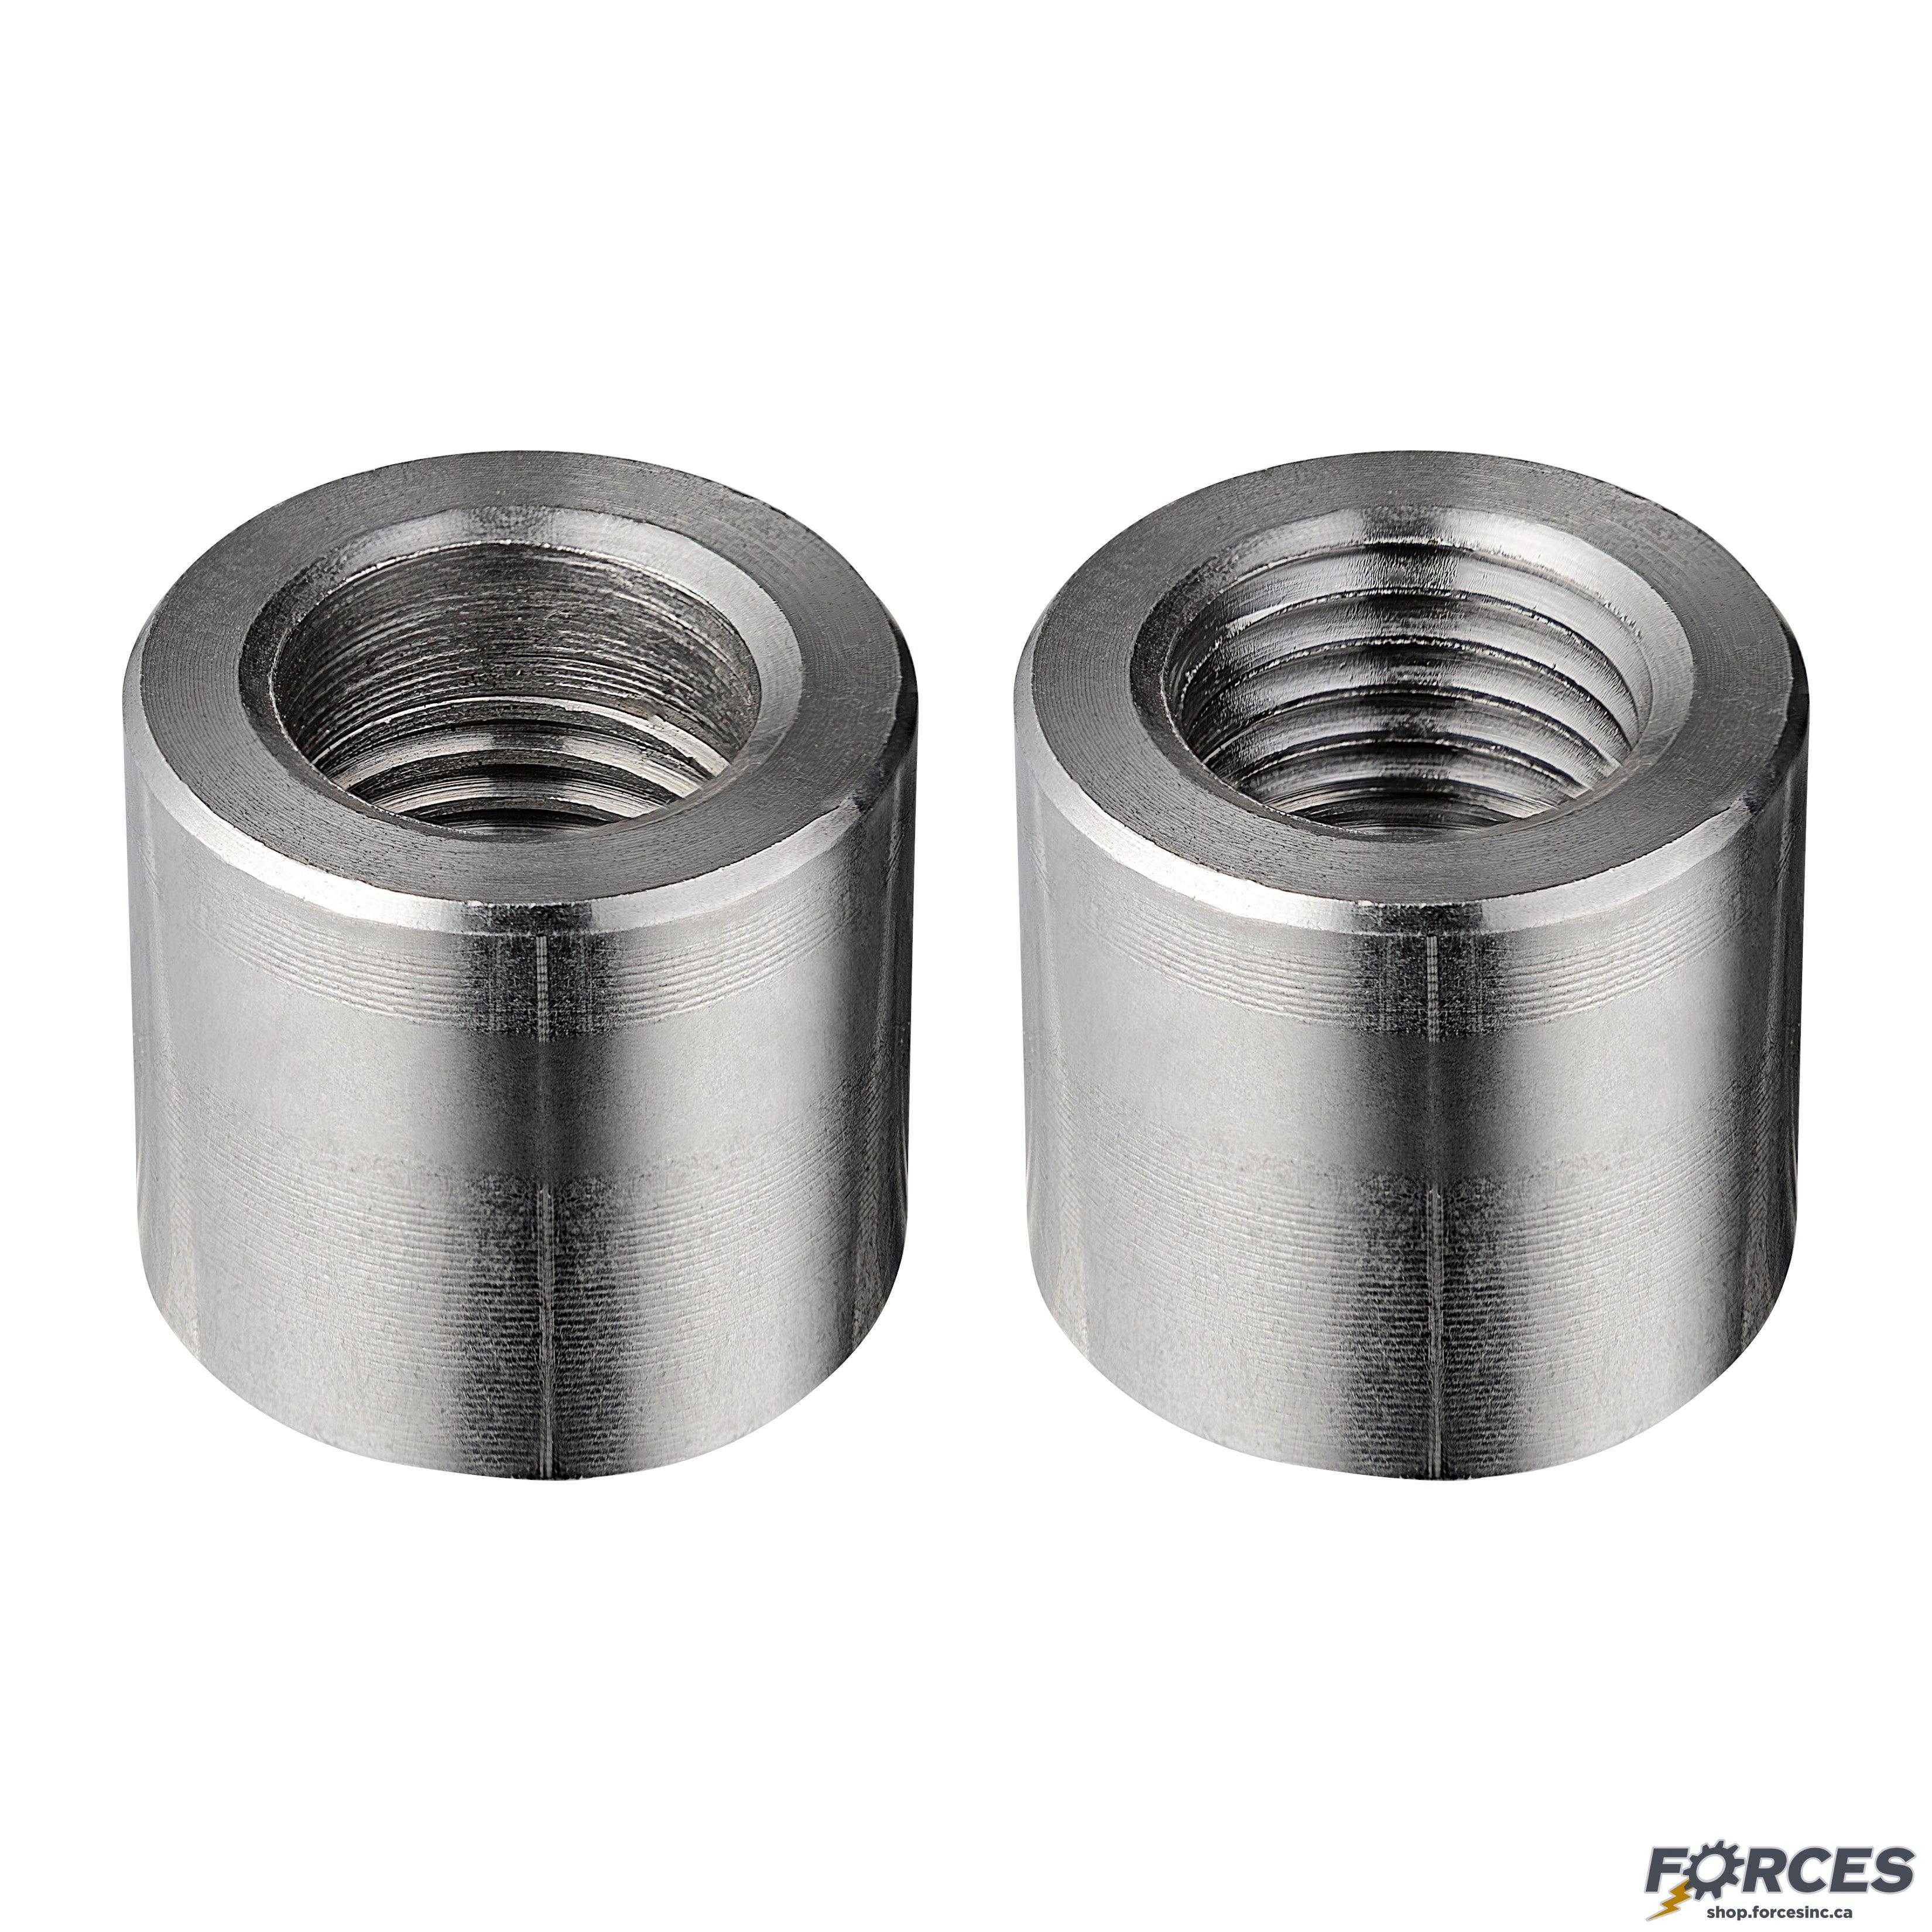 1/4" Half-Coupling NPT #3000 - Stainless Steel 316 - Forces Inc